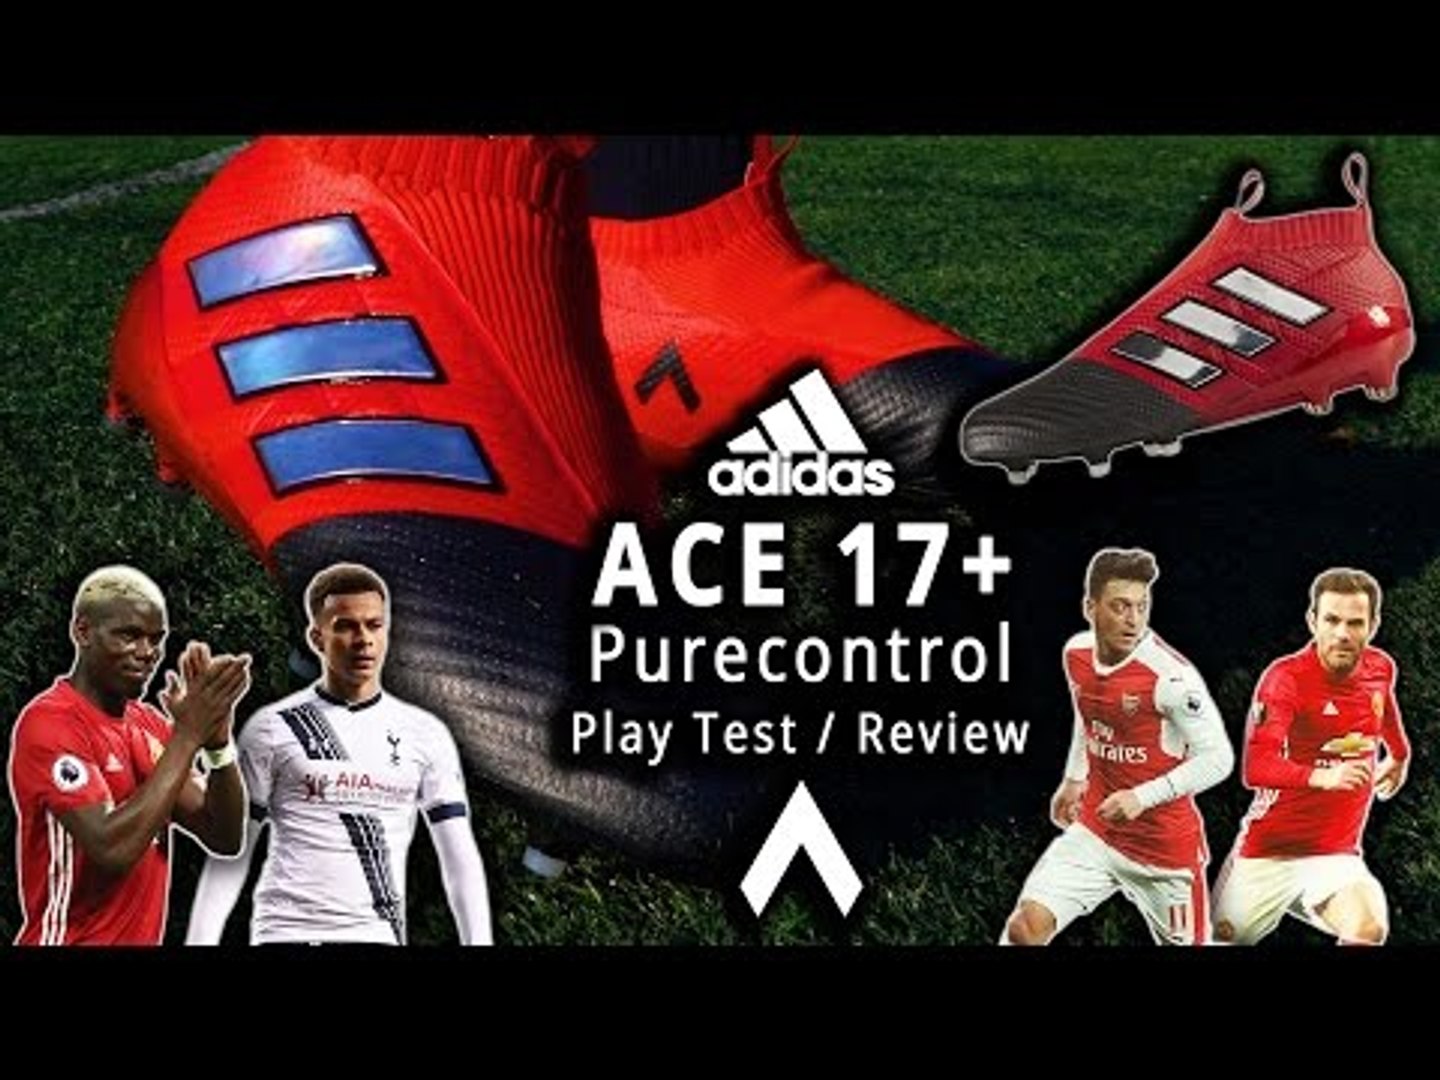 adidas 17+ Red Limit Review & Play Test - video